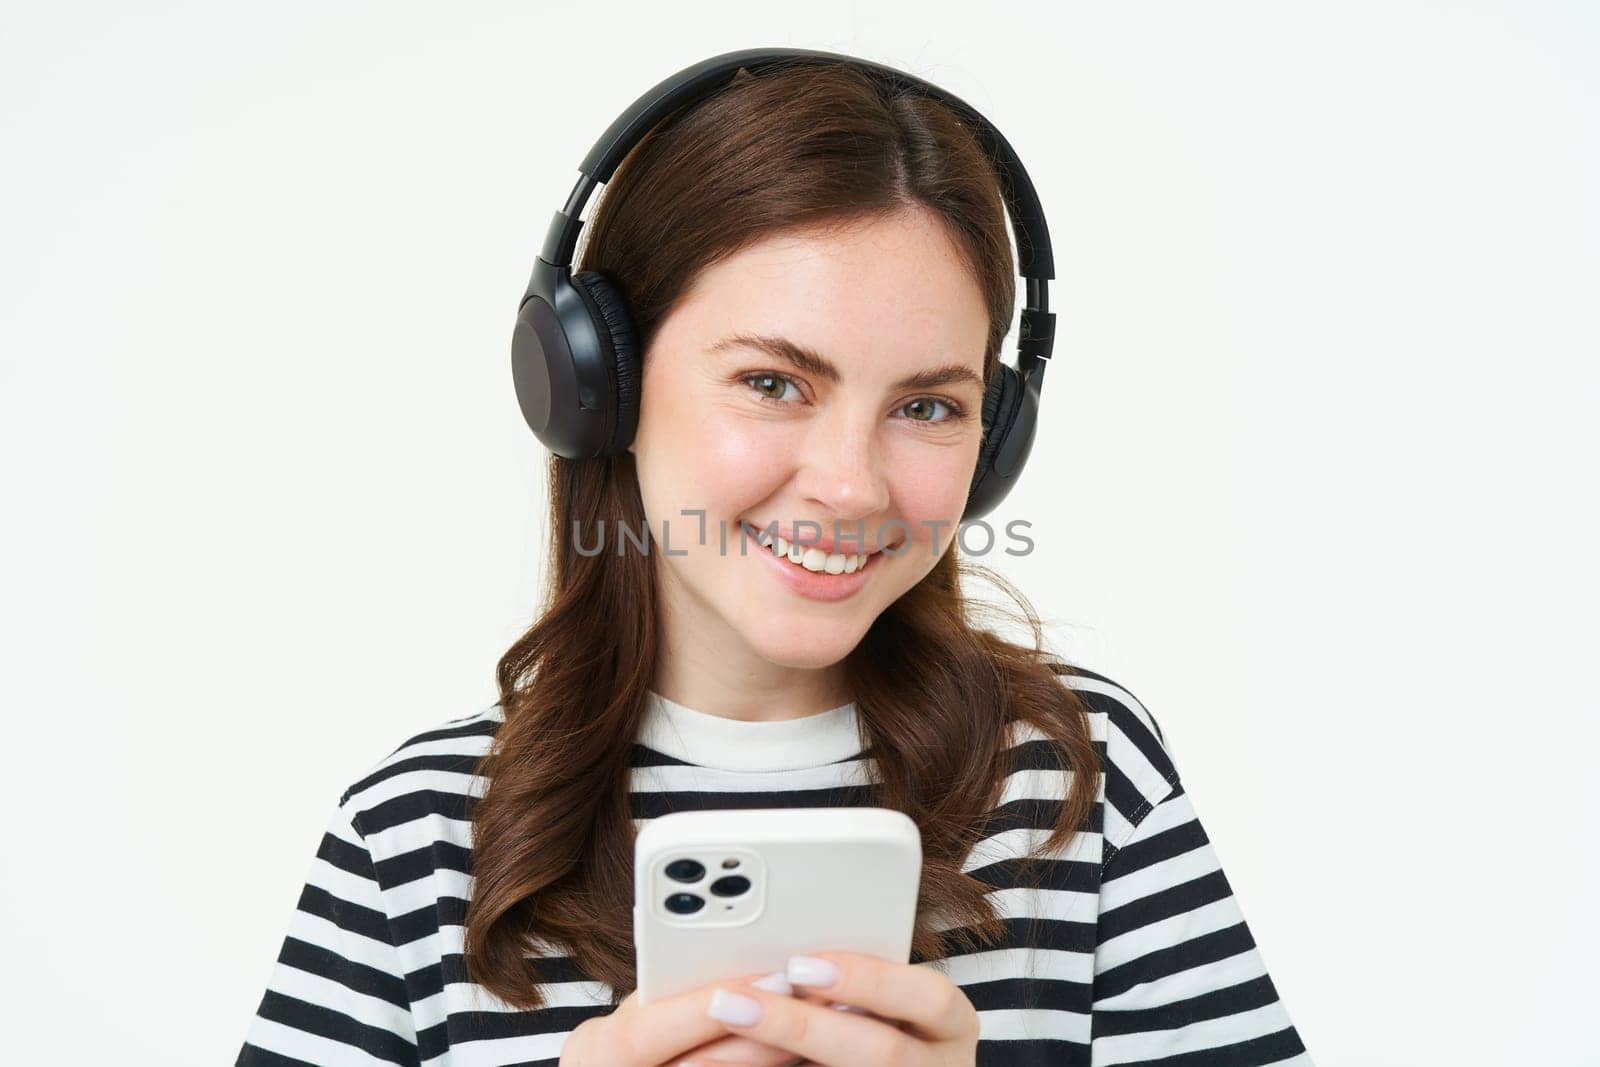 Image of brunette young woman, smiling, listening to music in headphones, watching videos on mobile phone app, holding smartphone, standing over white background.